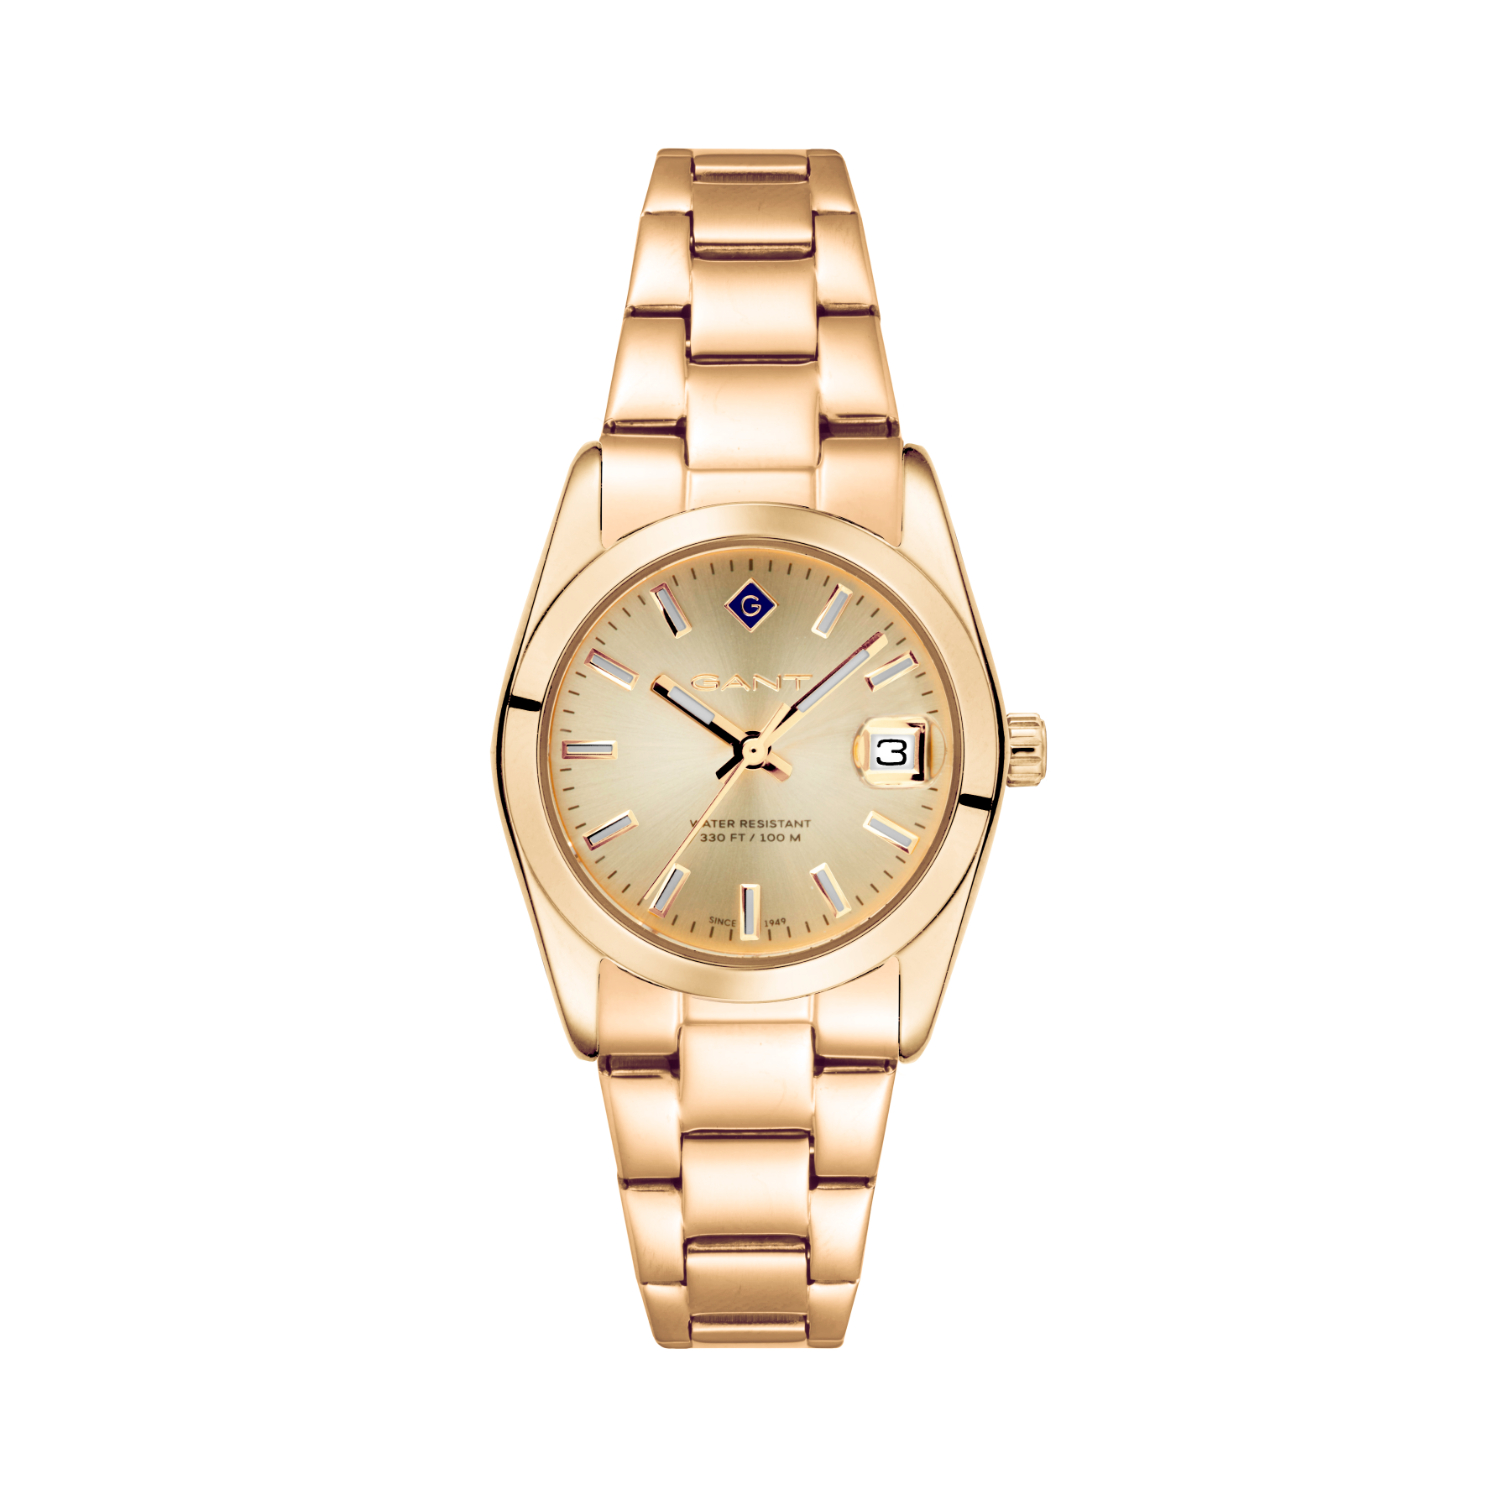 GANT womens watch in gold stainless steel with gold dial and bracelet.